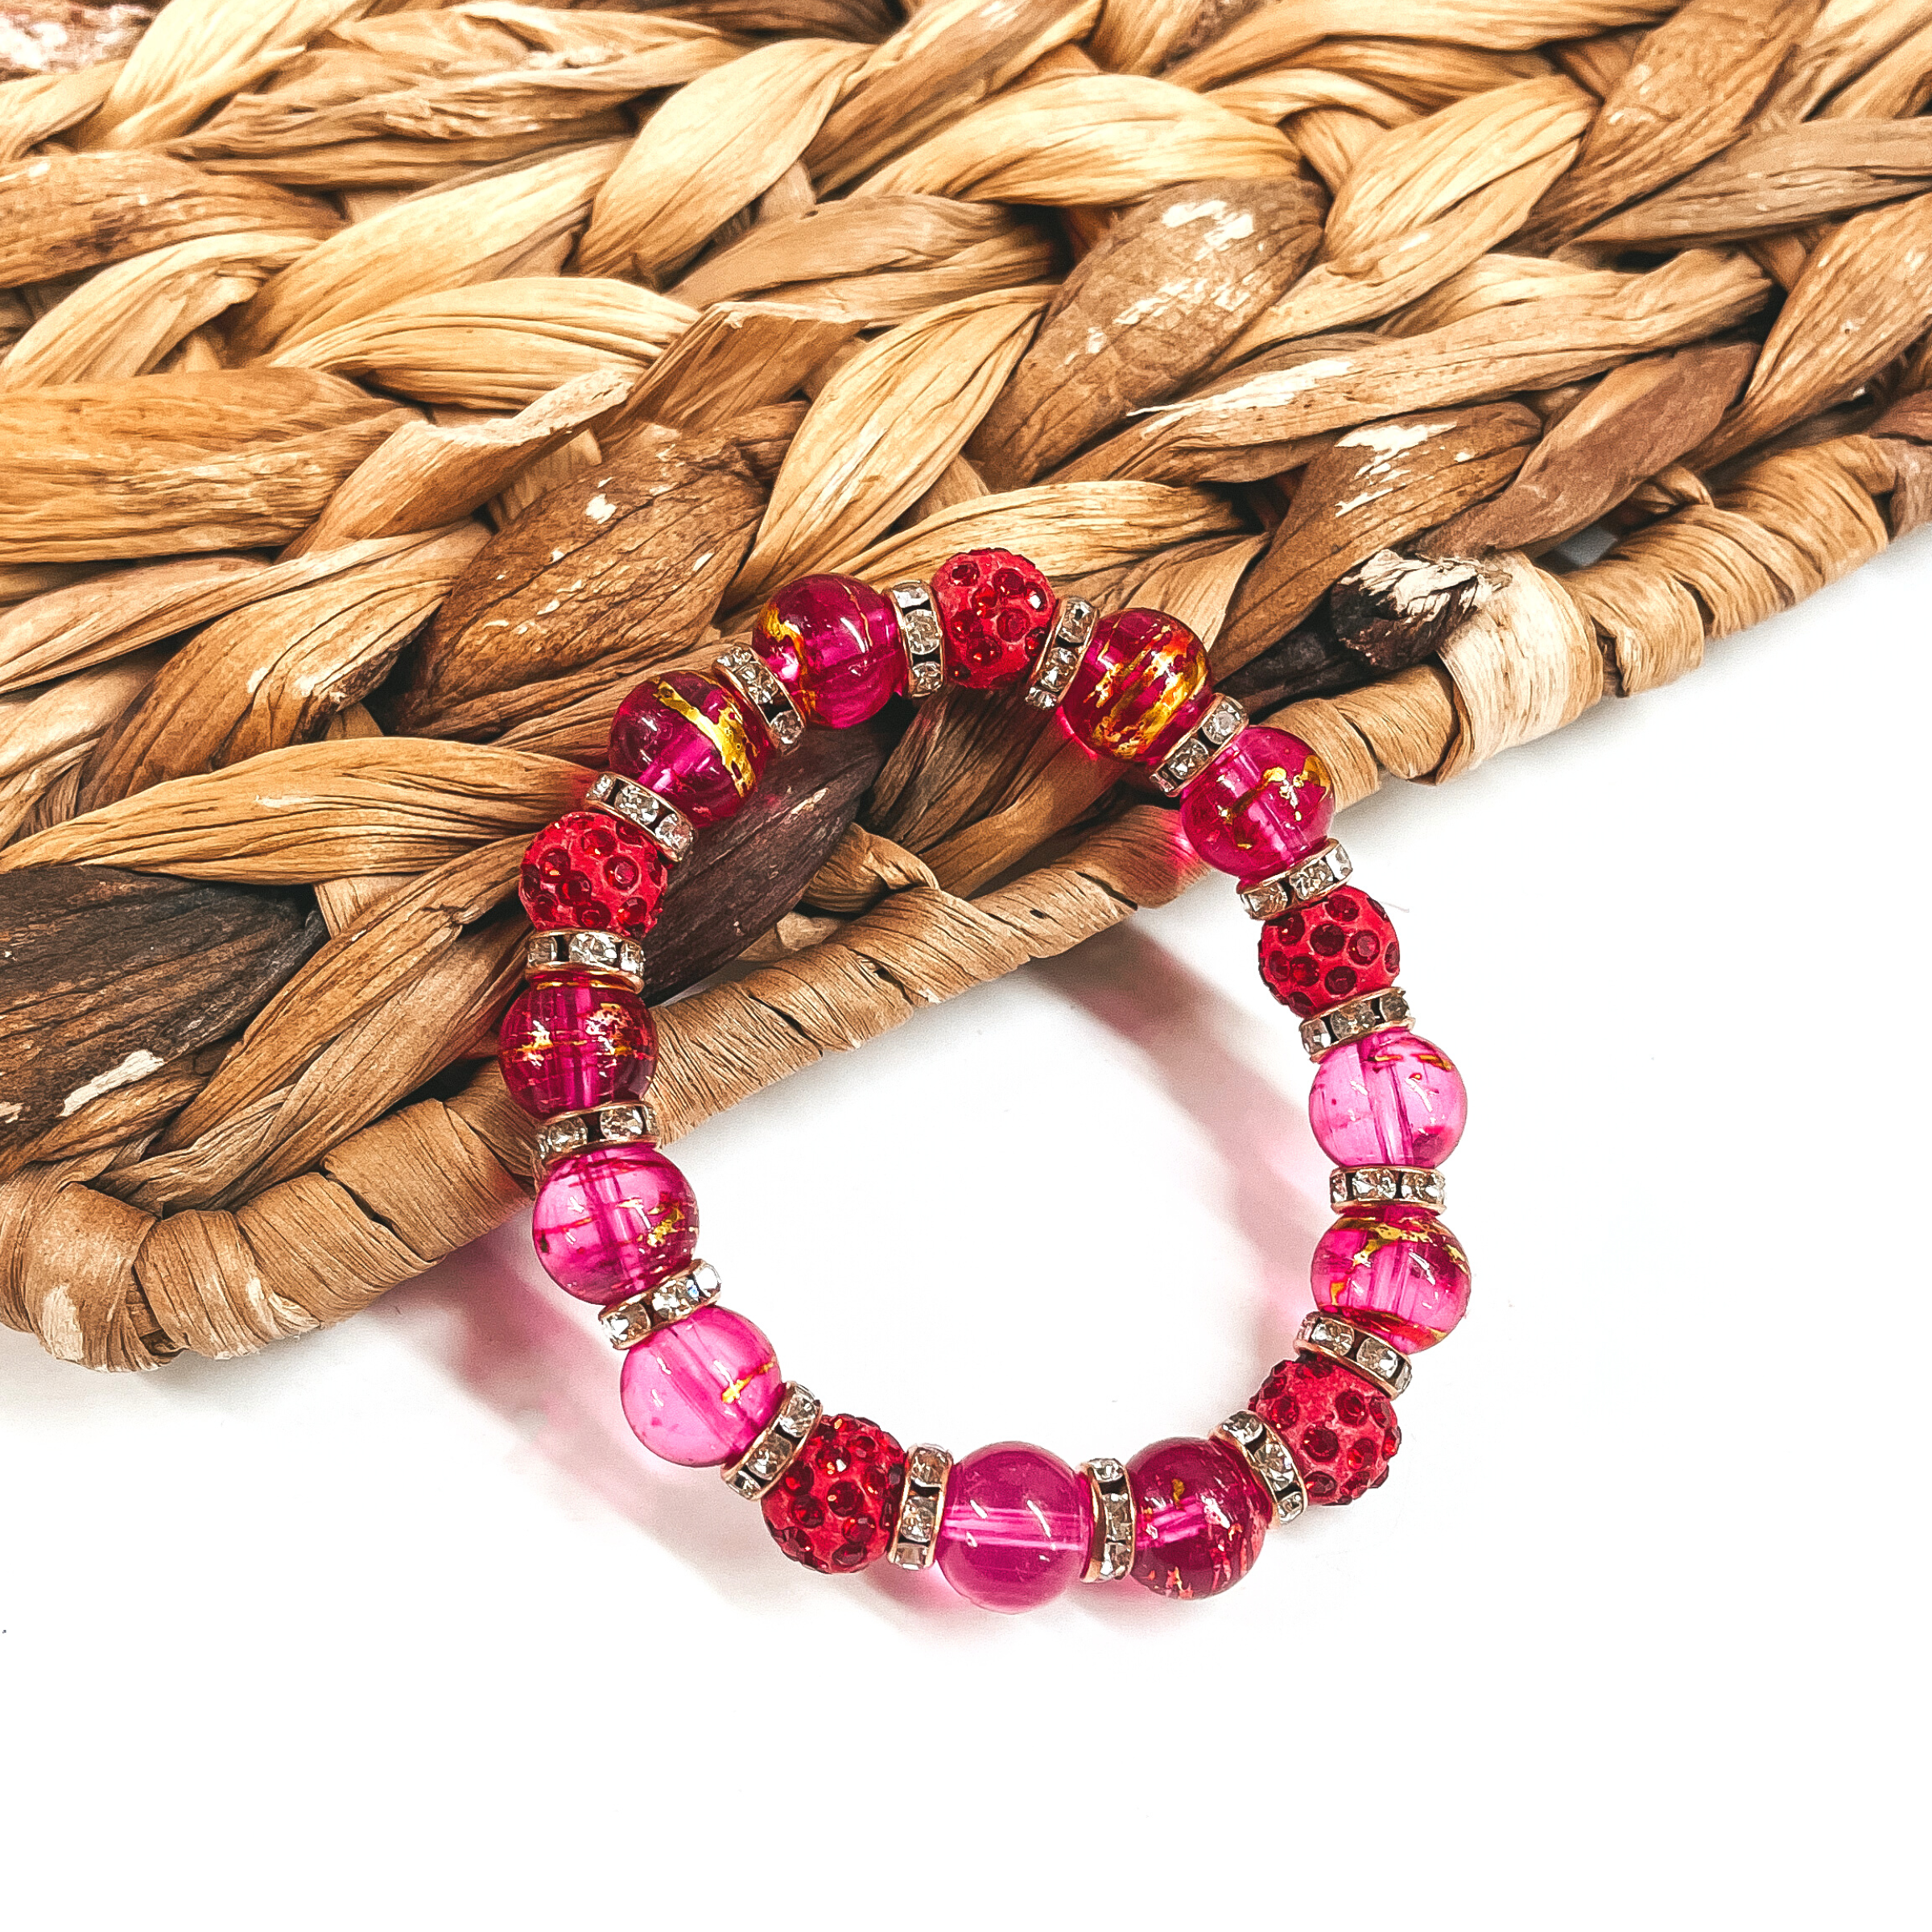 Buy 3 for $10 | Stretchy Bracelet with Crystal Detailing